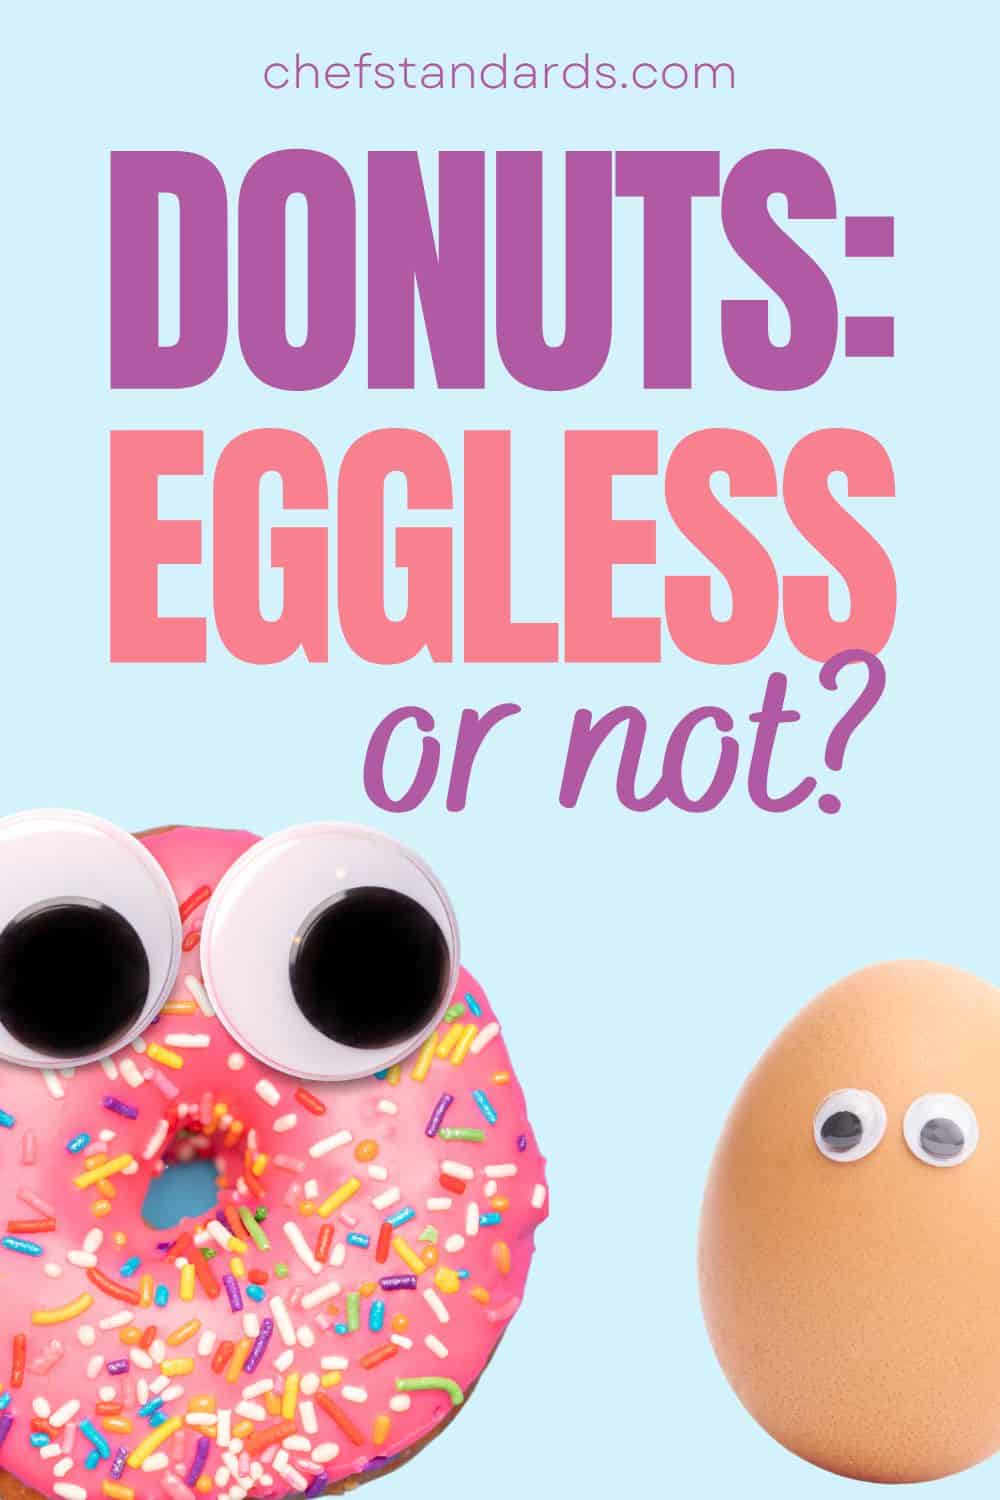 Do Donuts Have Eggs In Search For Vegan-Friendly Donuts